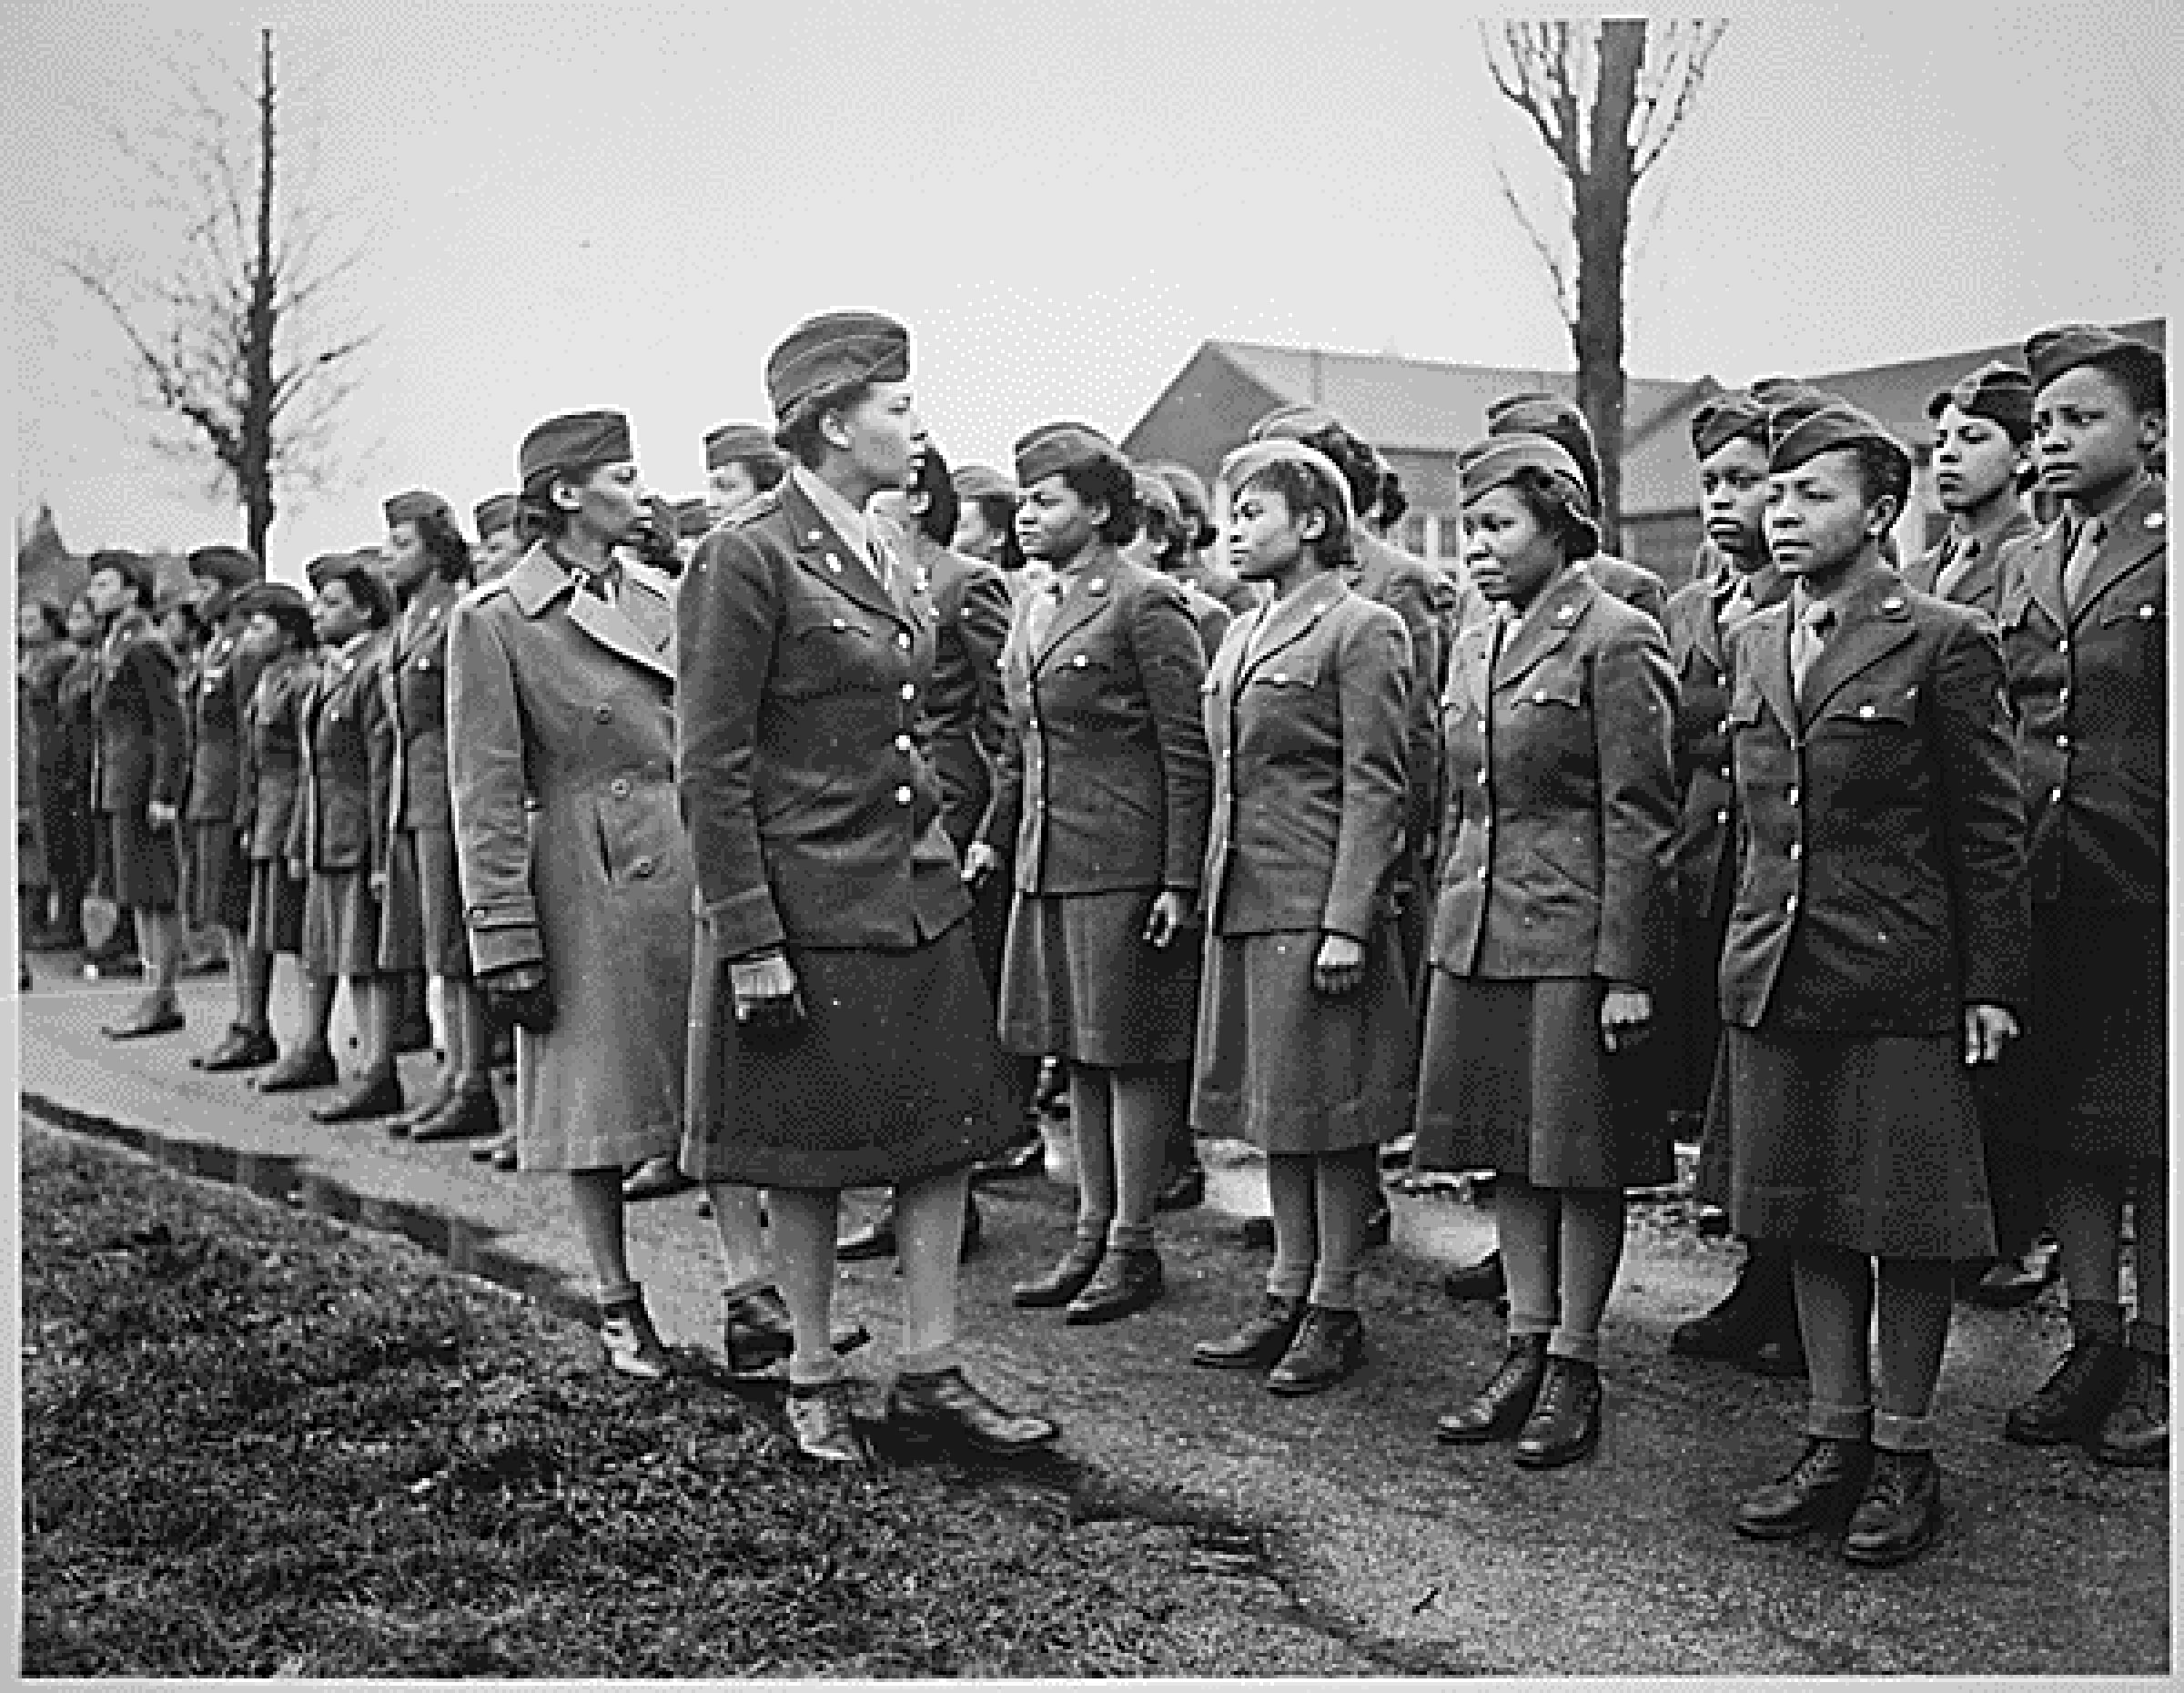 Charity Adams in uniform walks along a line of female soldiers inspecting their uniforms